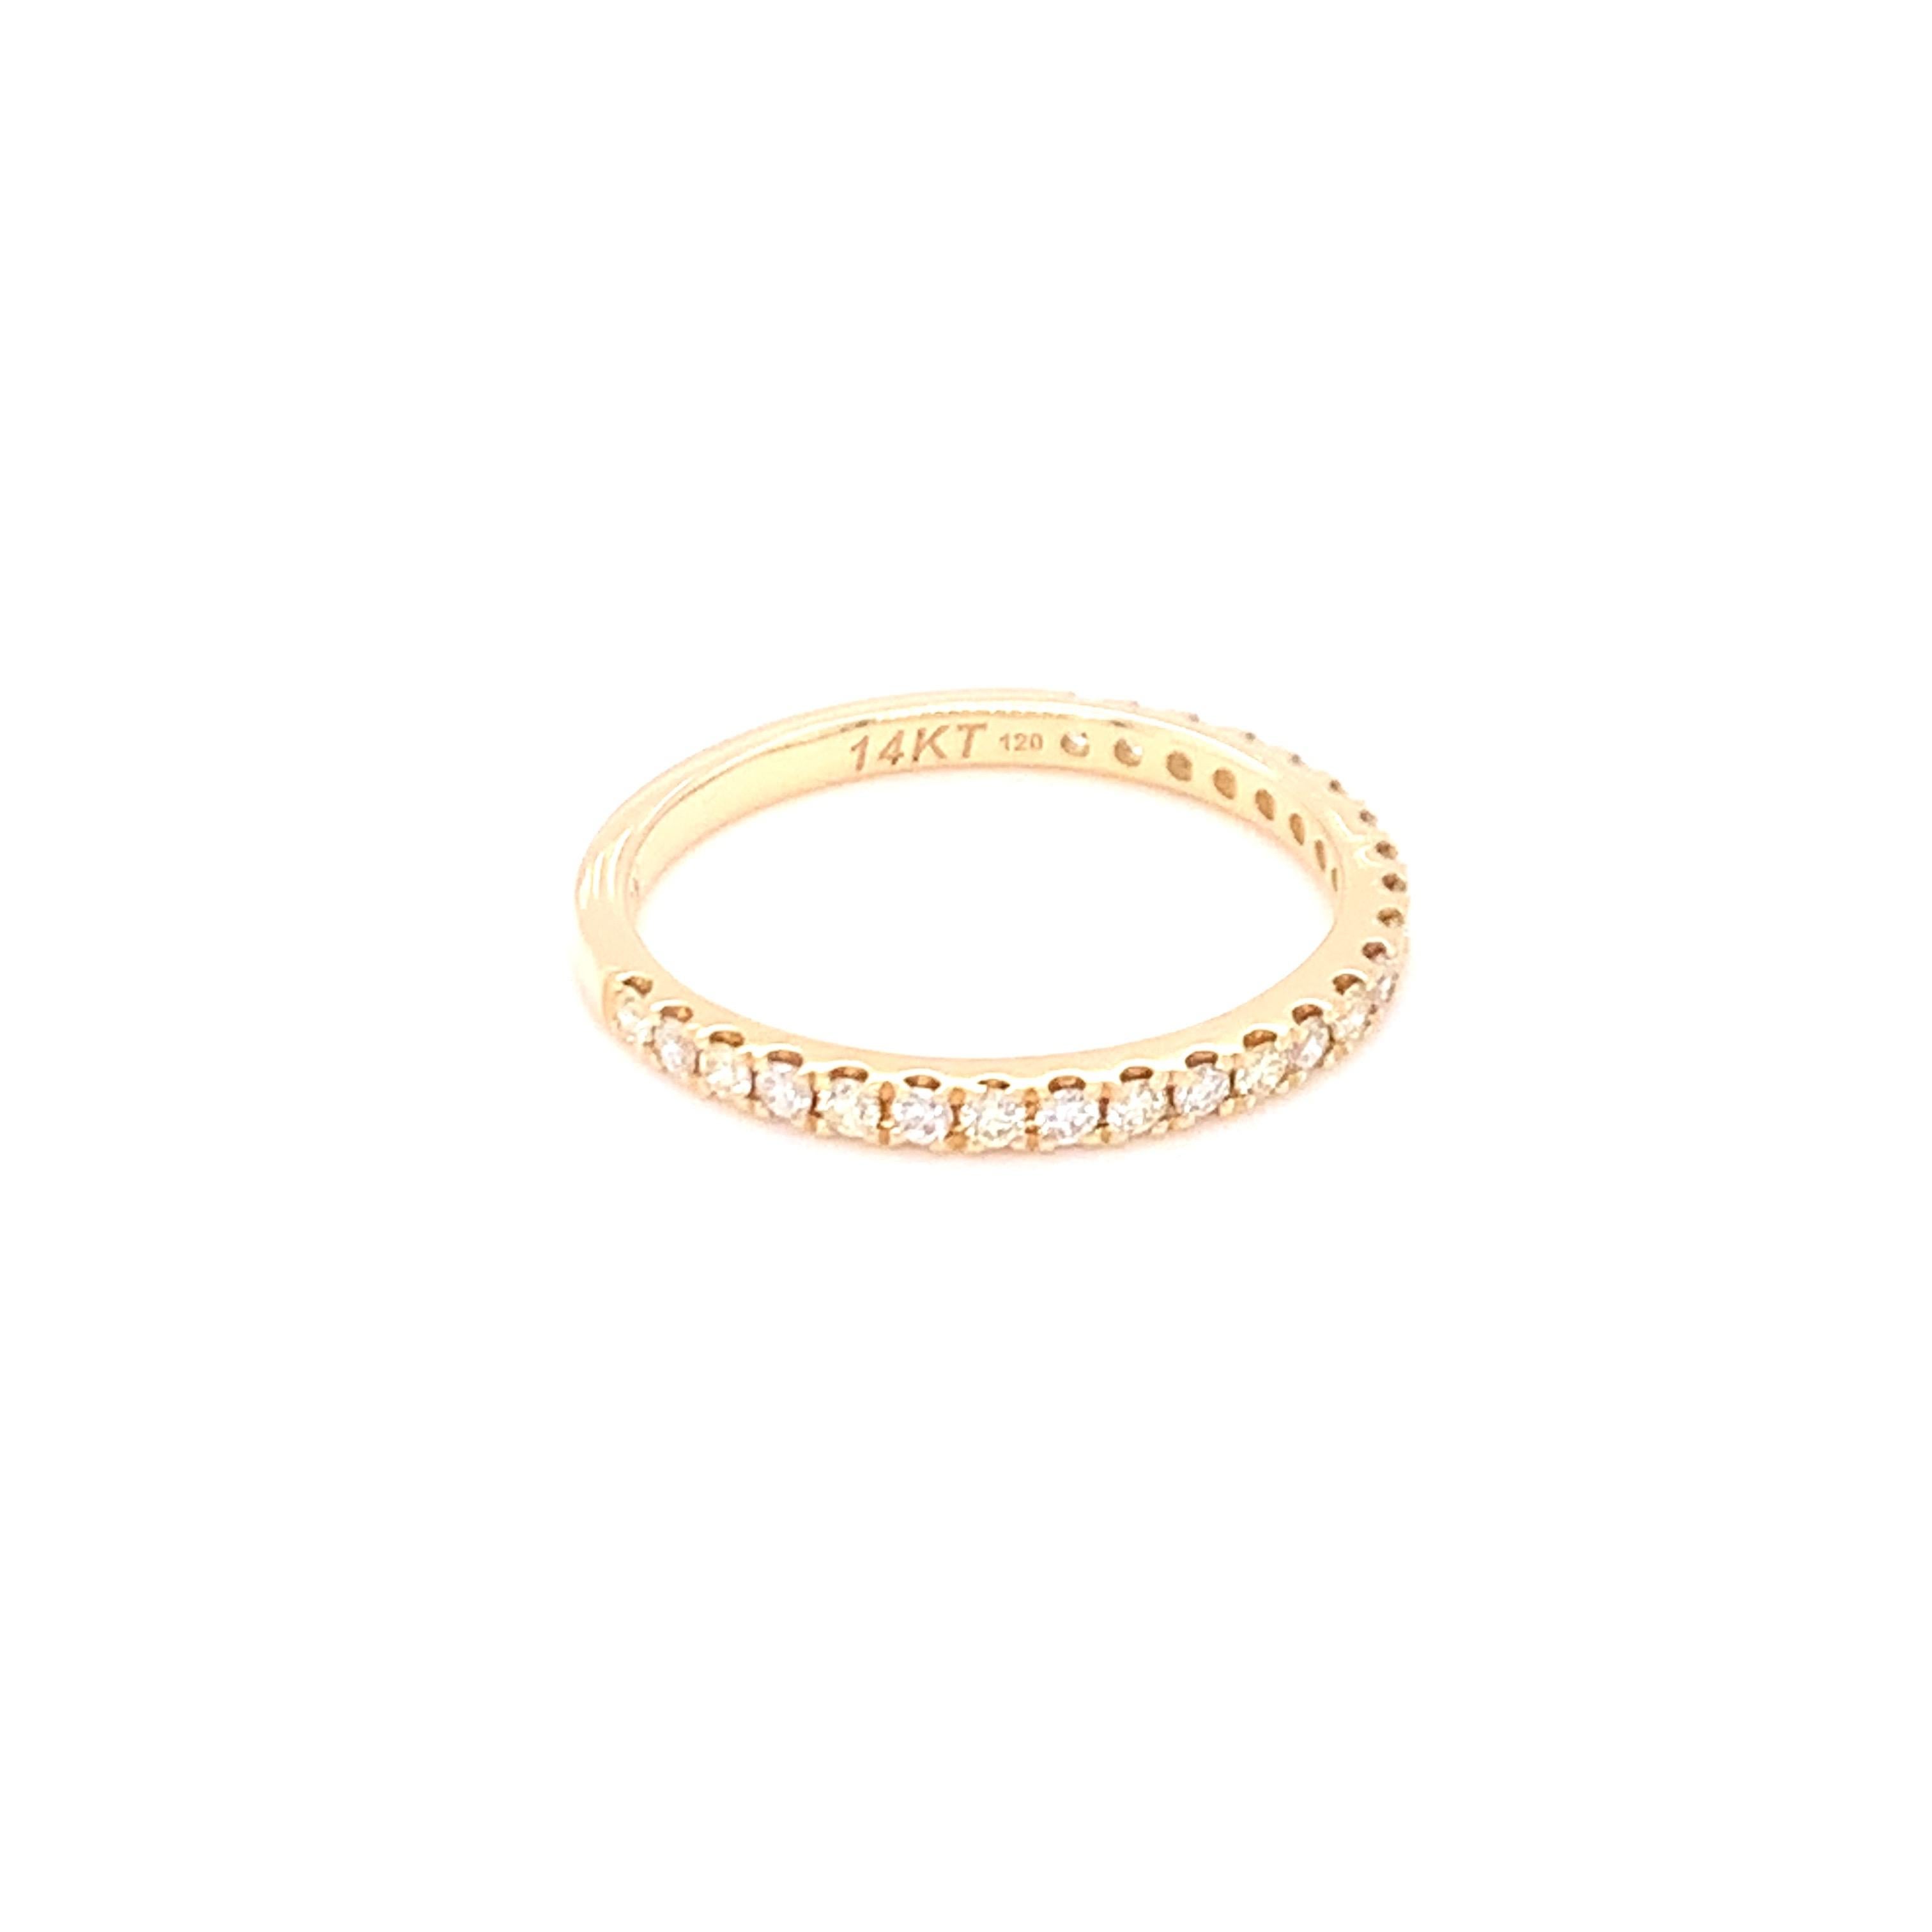 This simple and plain design band mounted on yellow gold is suitable for everyday wear.
Yellow Diamond: 0.15ct
White Diamond: 0.14ct
Gold: 14 K Yellow
Ring Size: 7